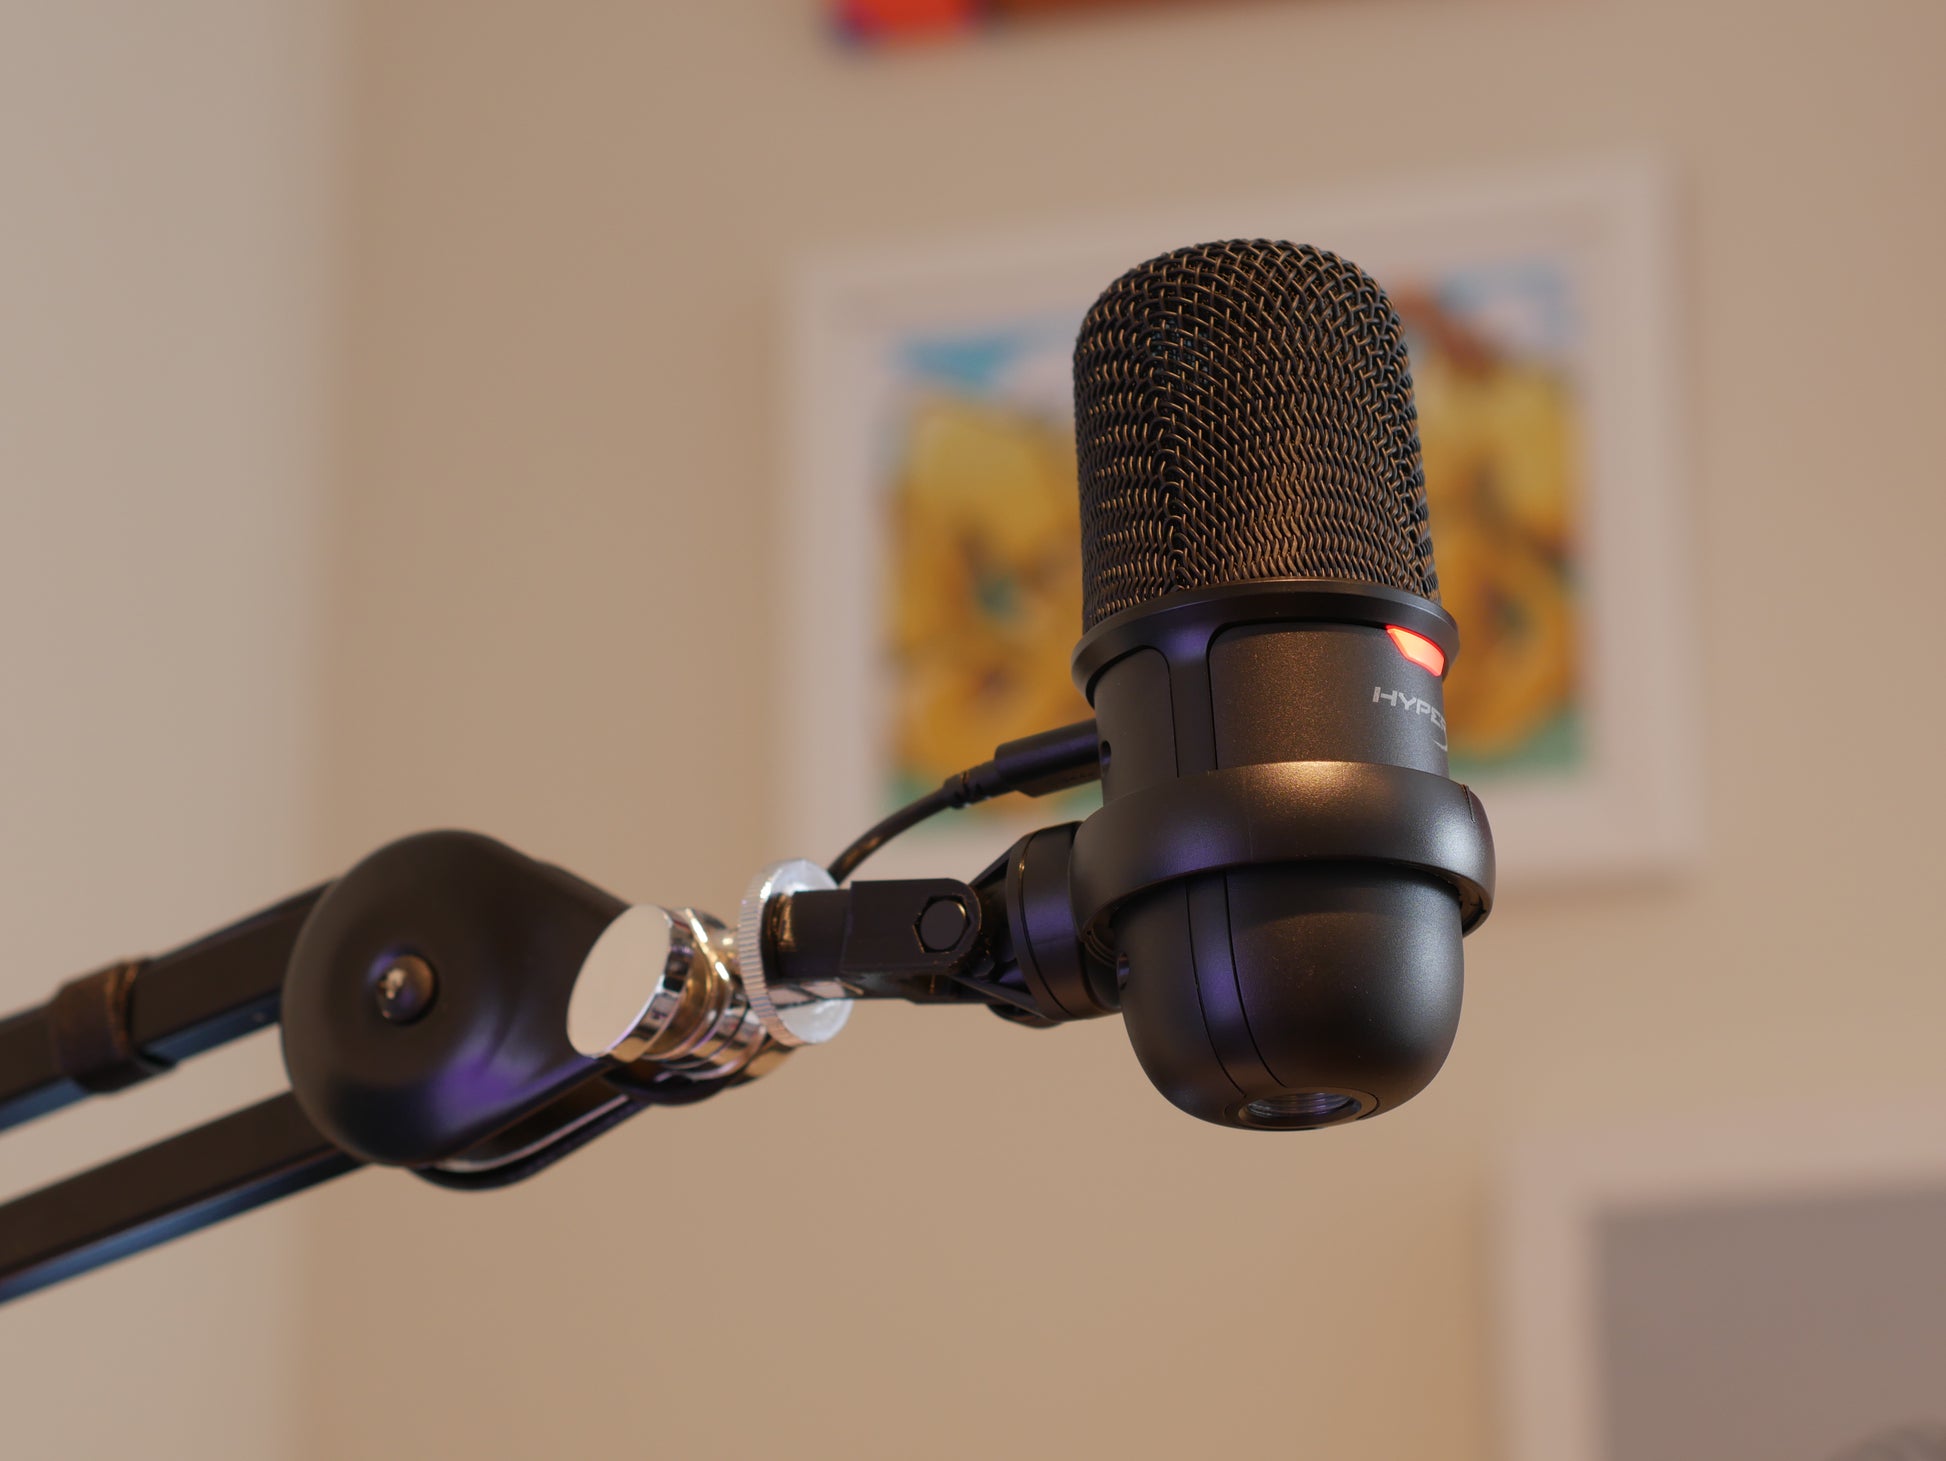 HyperX SoloCast microphone review